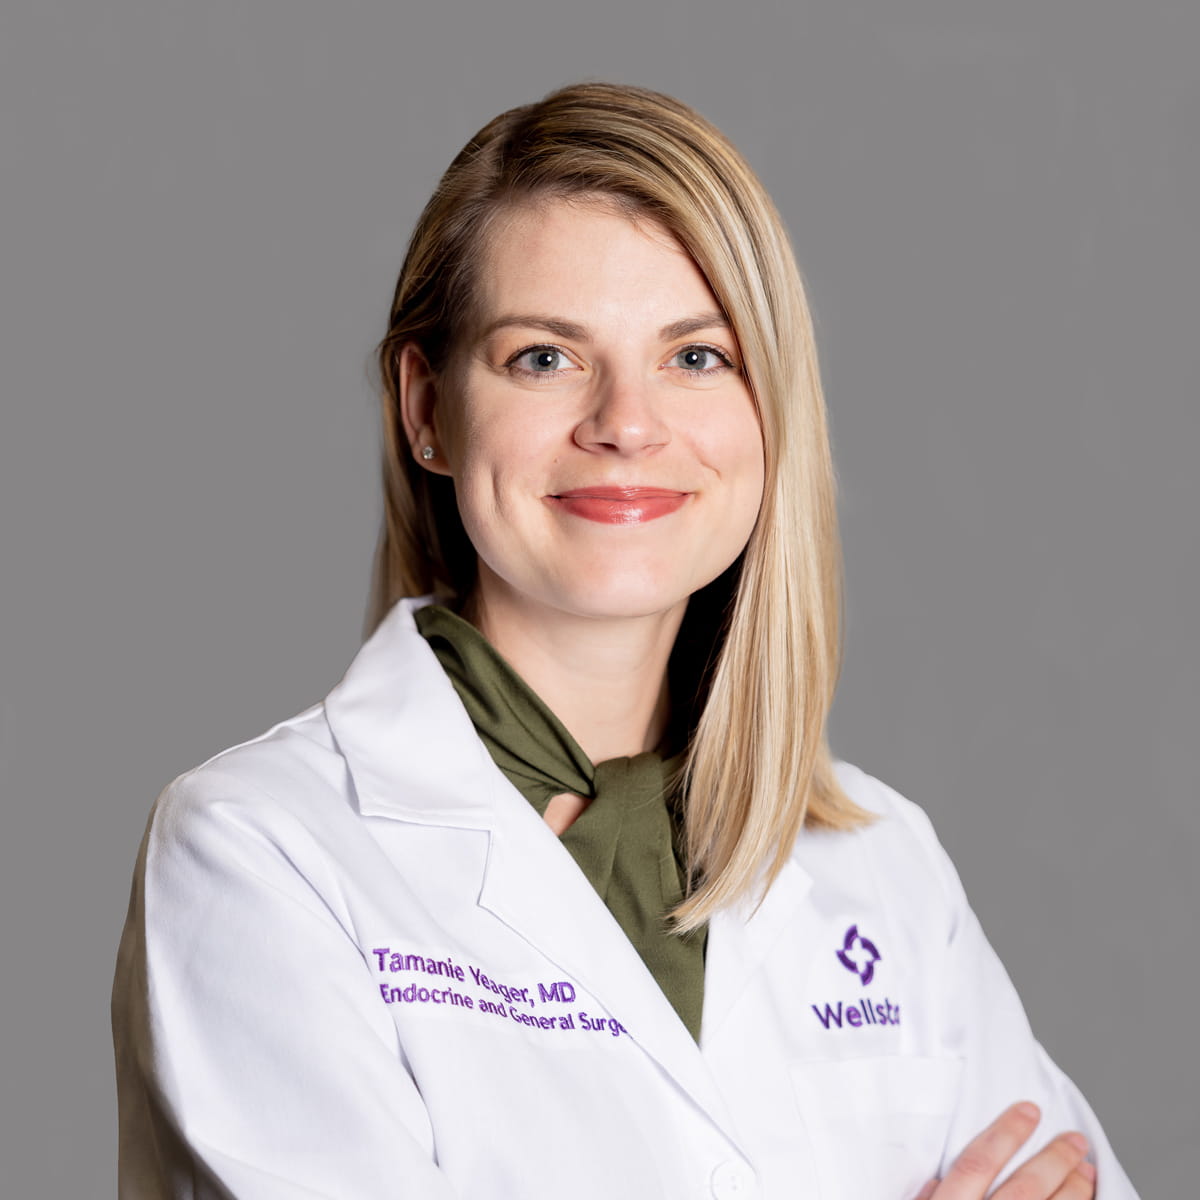 A friendly image of Tamanie Yeager MD